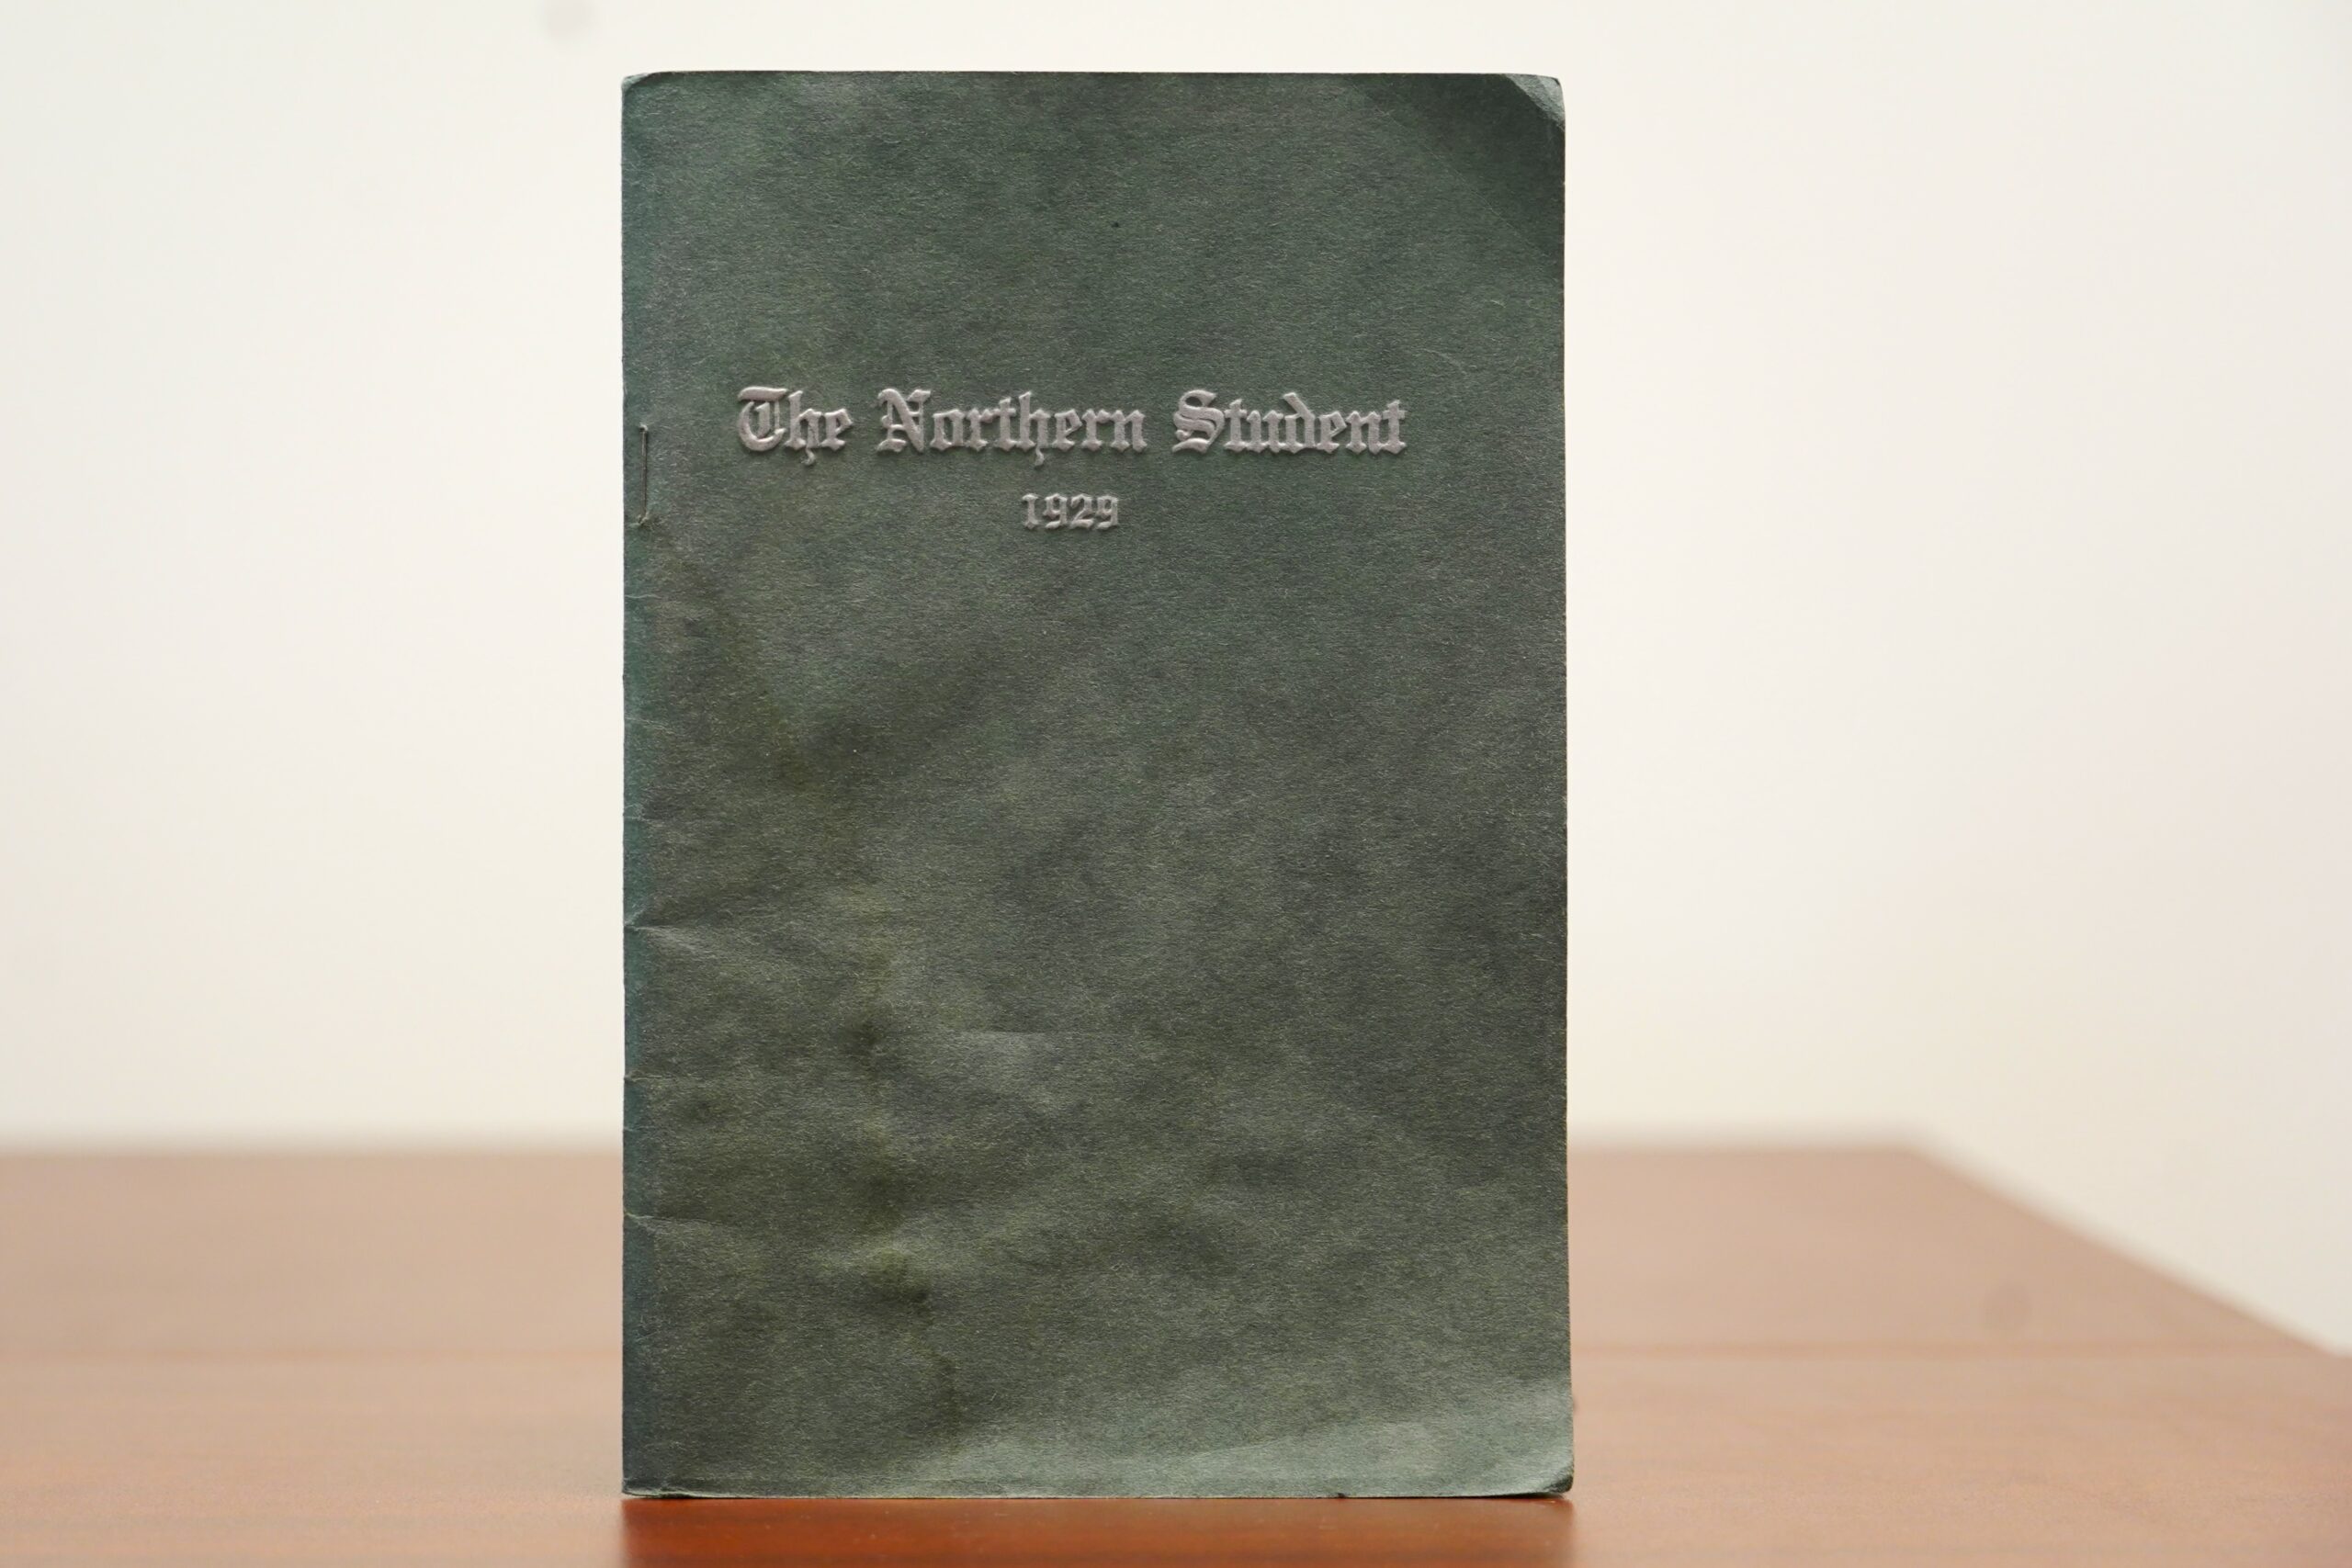 The June 1929 edition of the Northern Student.